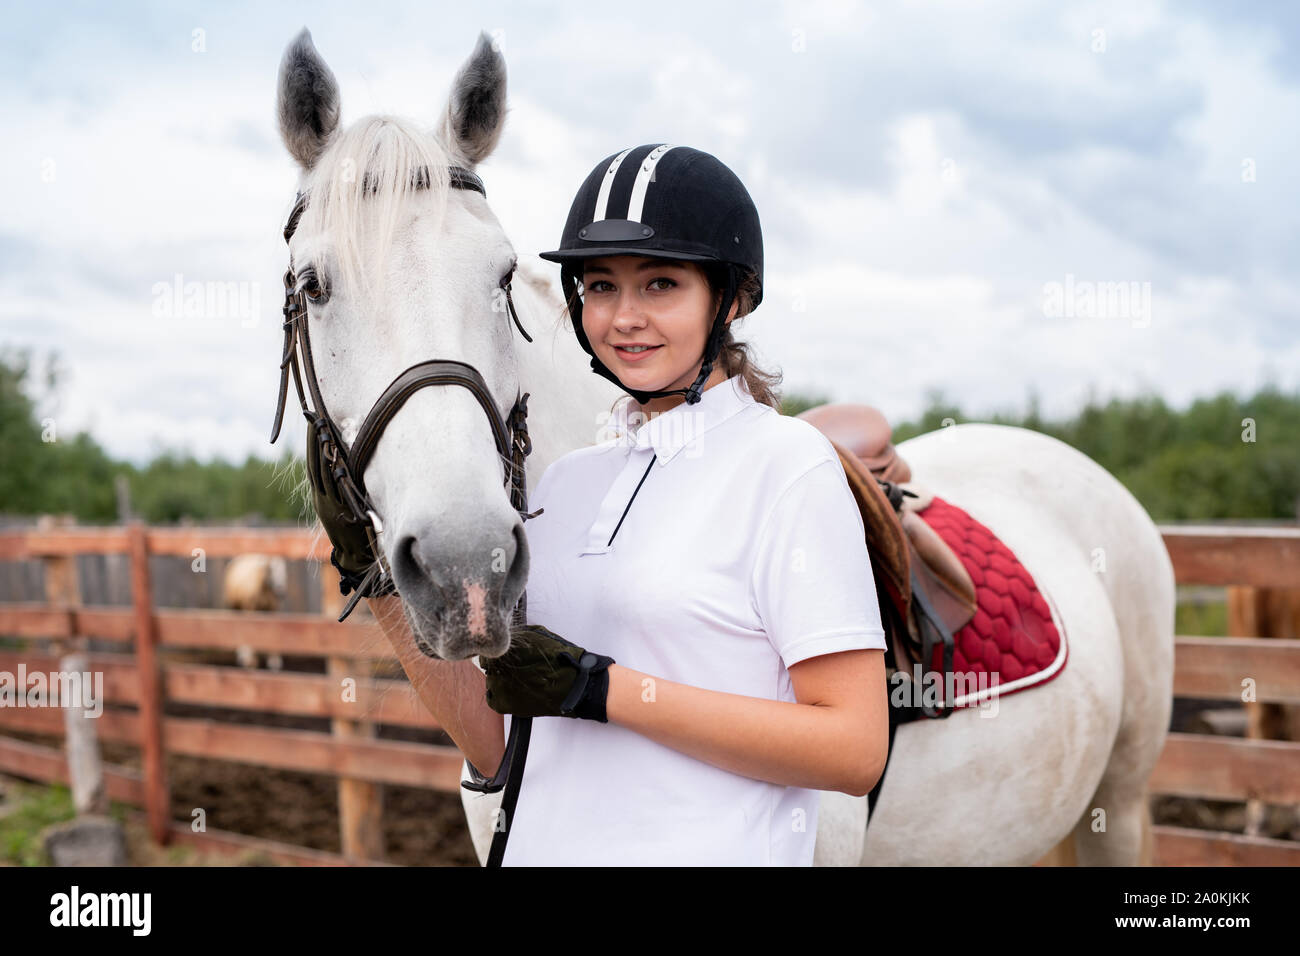 Young smiling woman in equestrian outfit standing close to white racehorse Stock Photo